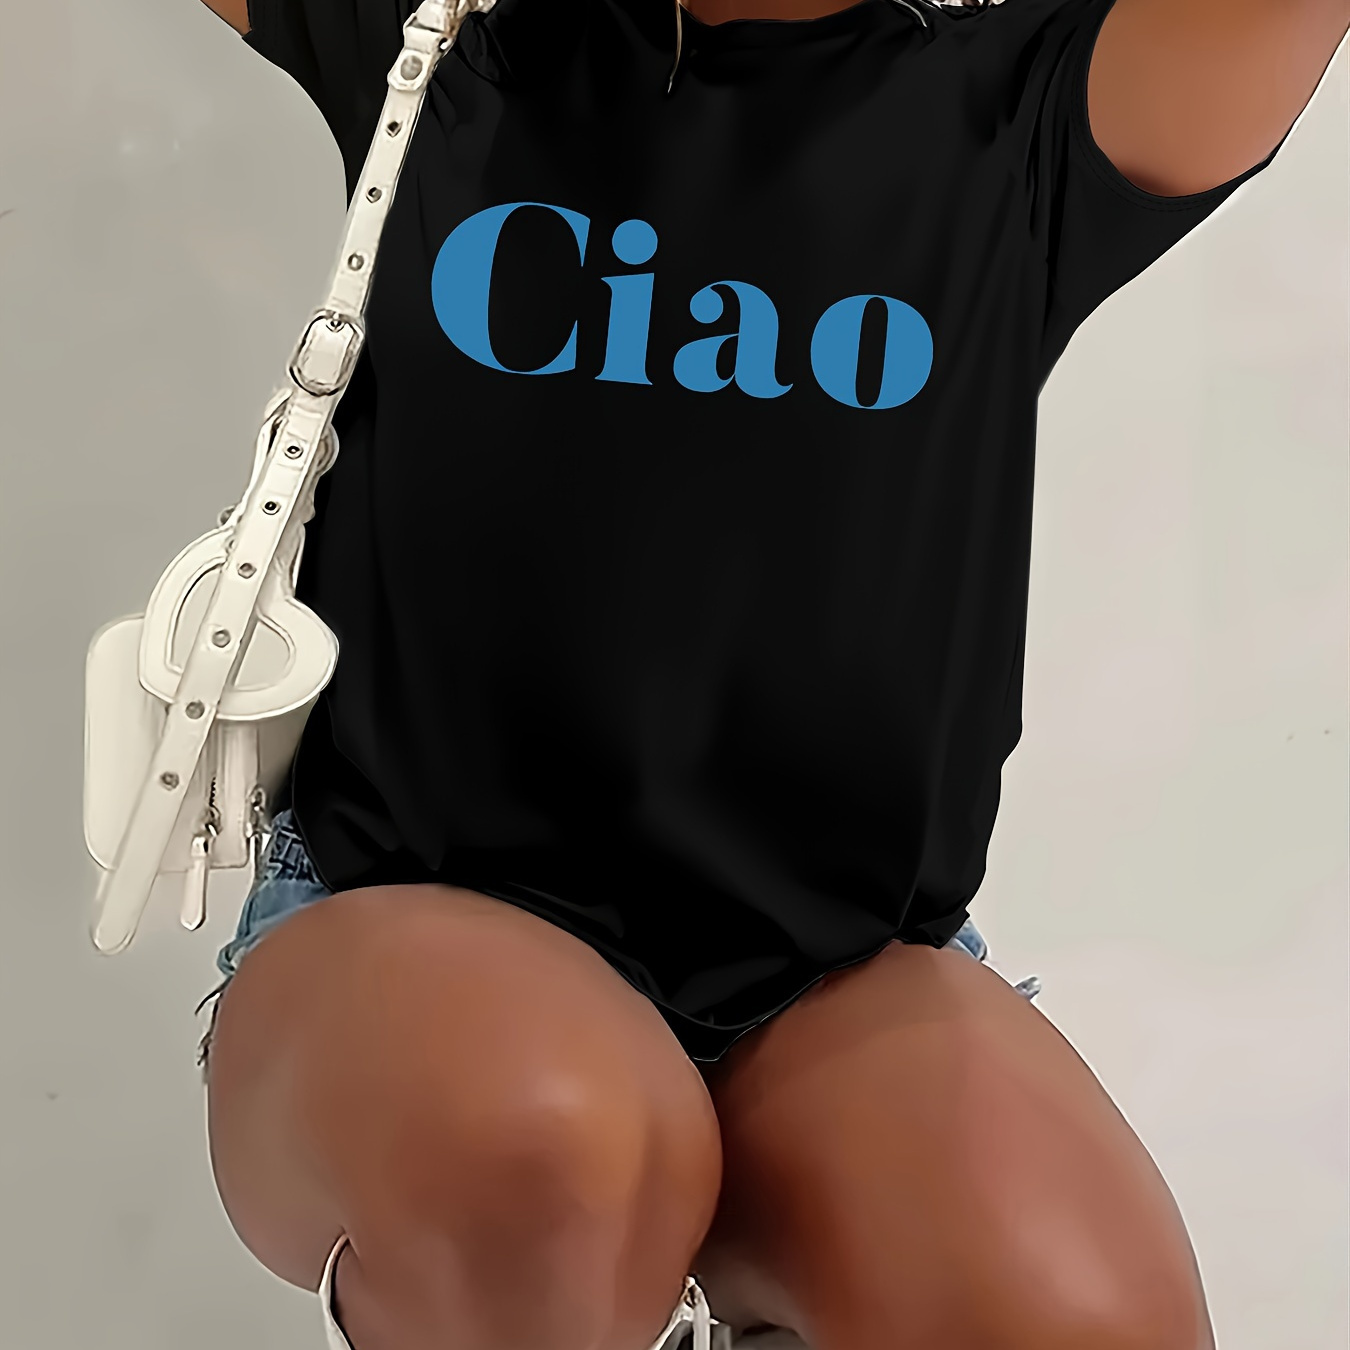 

Ciao Print Crew Neck T-shirt, Casual Short Sleeve Top For Spring & Summer, Women's Clothing